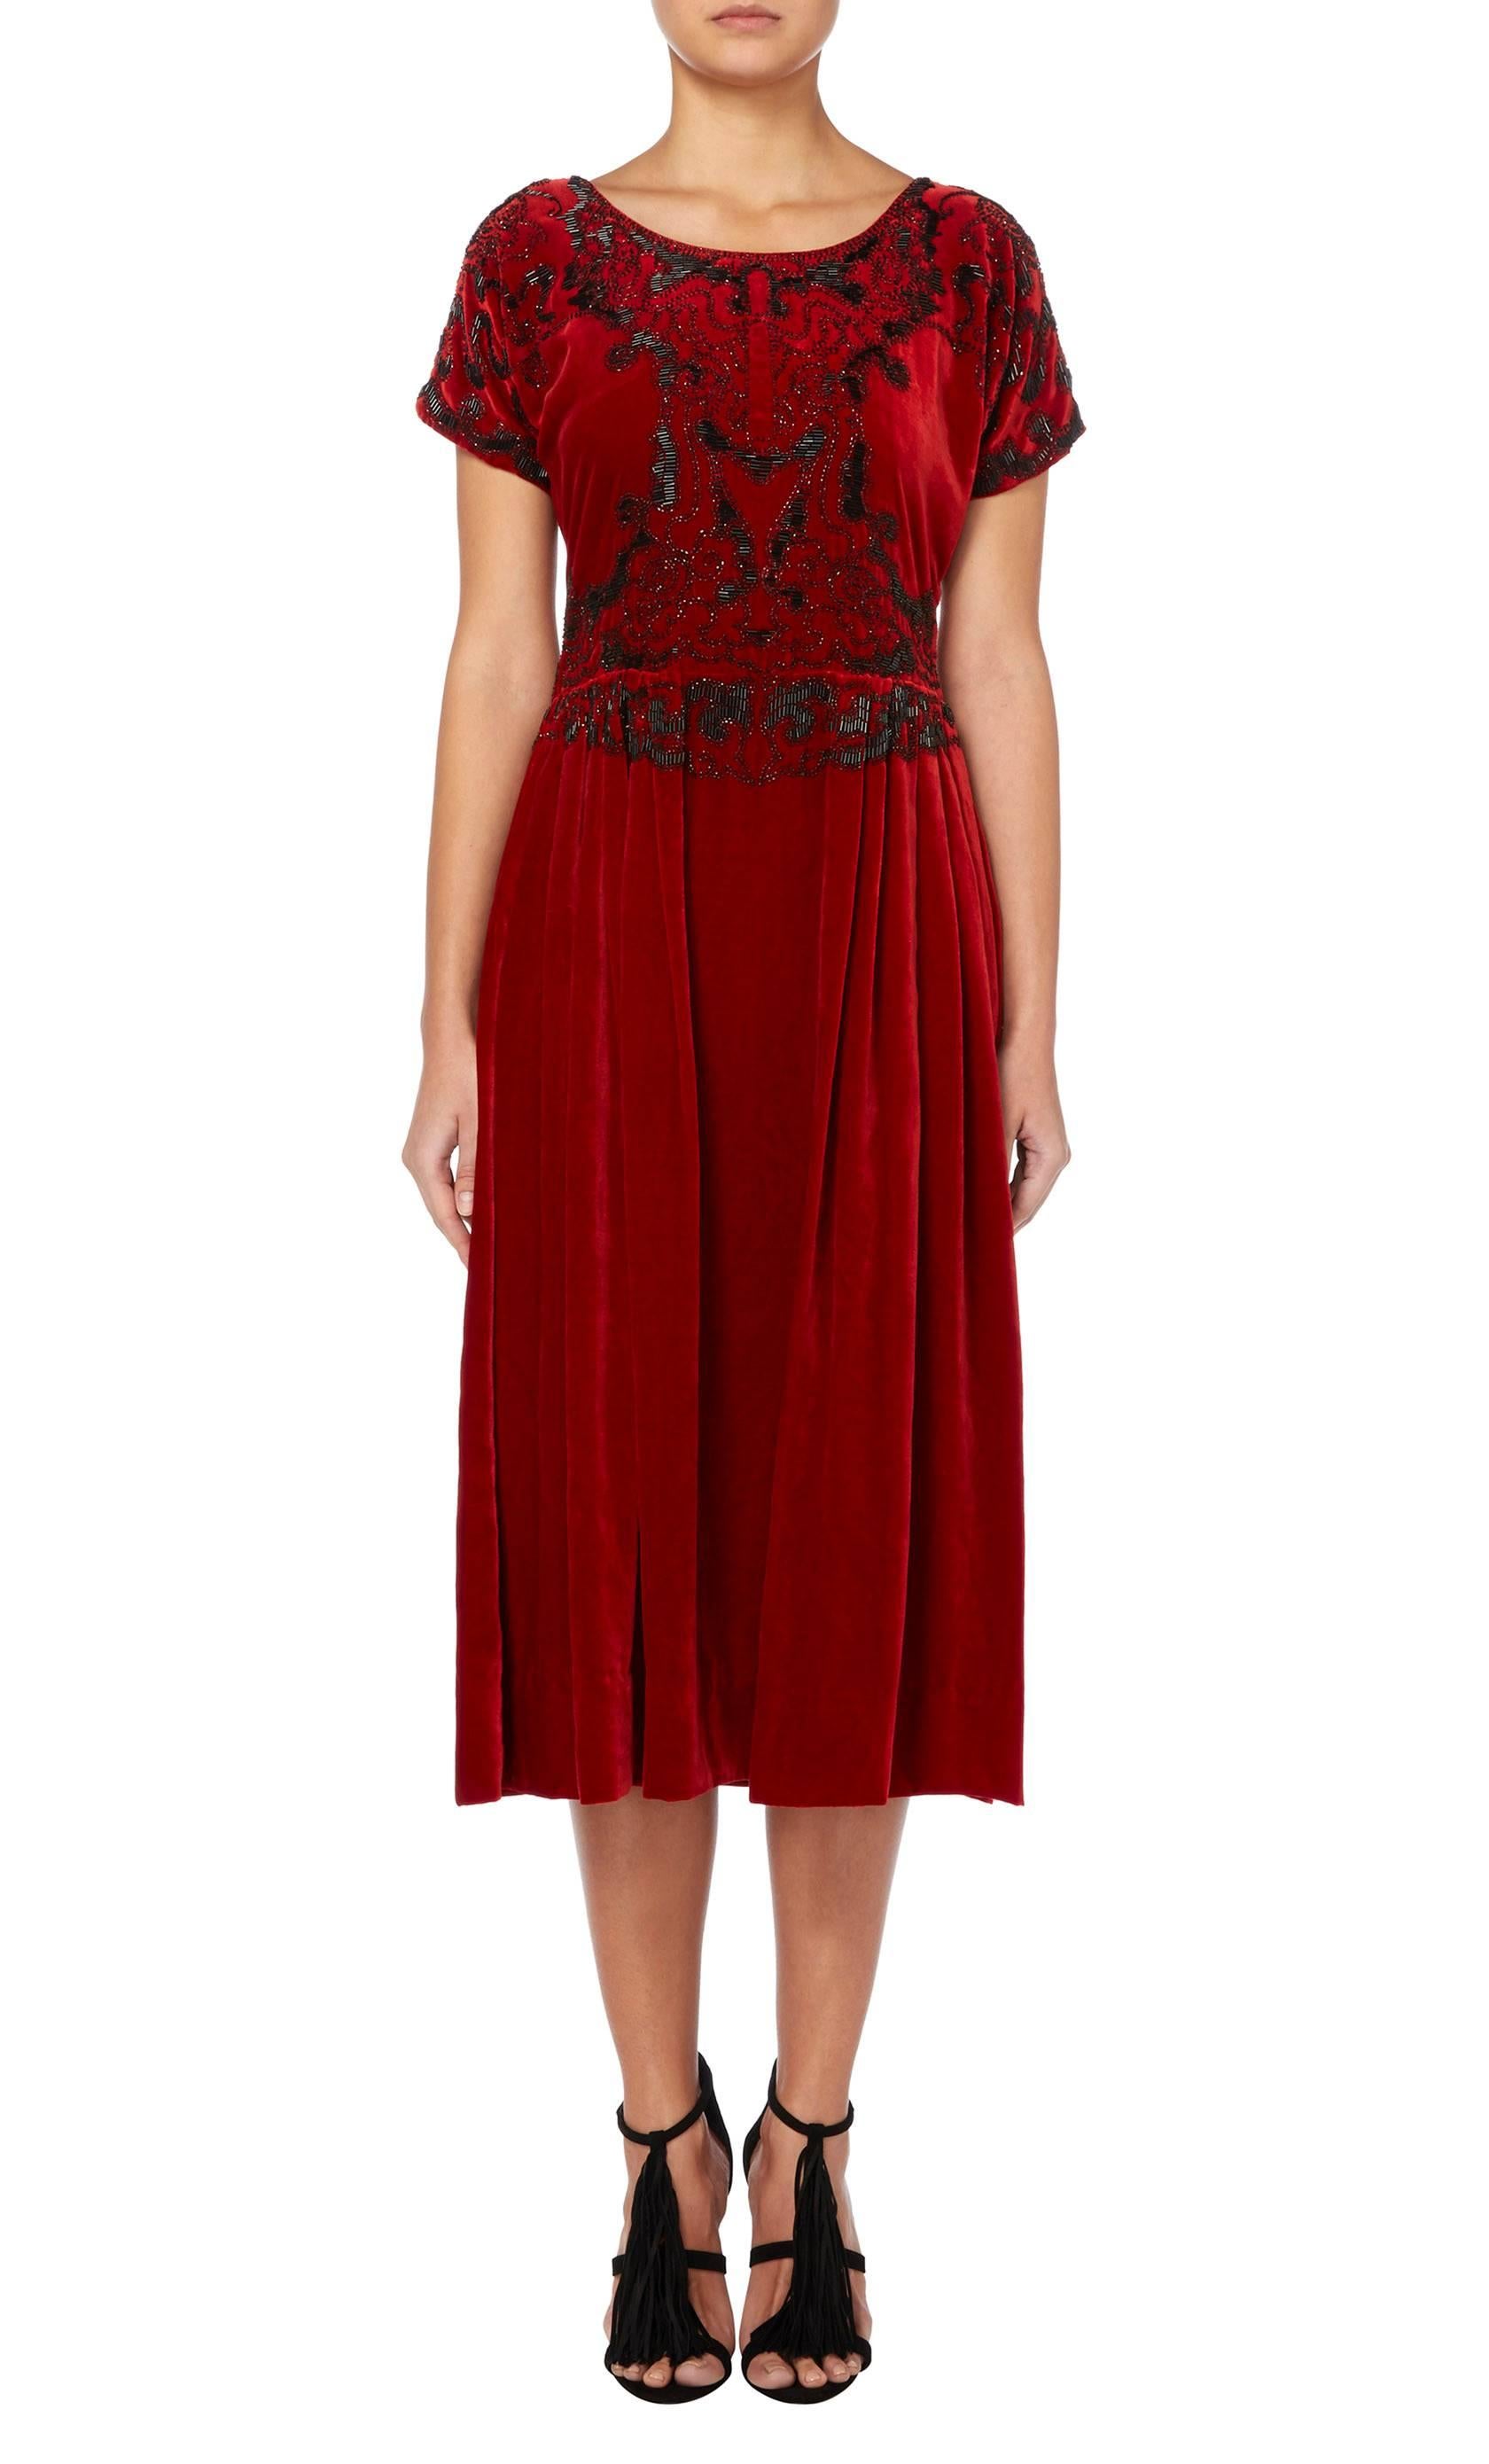 Designed by the legendary Paul Poiret in c1925, this haute couture cocktail dress is an exceptional example of the designers work. Constructed of the finest ruby red silk velvet, the dress is intricately embroidered with black glass bugle beads on